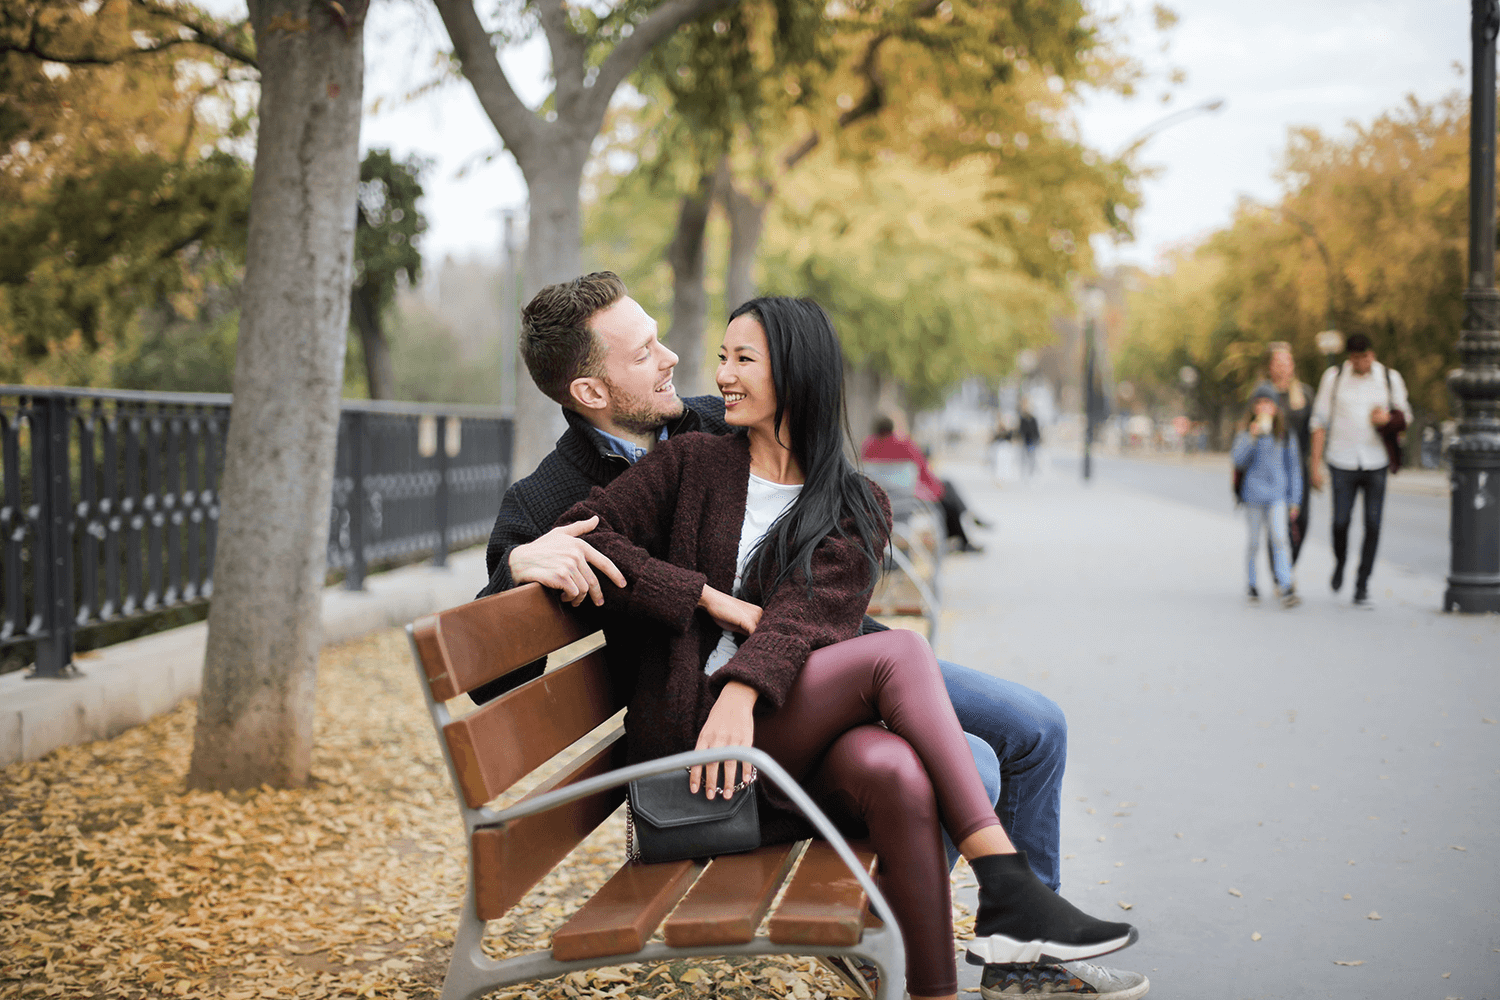 A couple talking to each other while sitting on a park bench so that they avoid miscommunication.